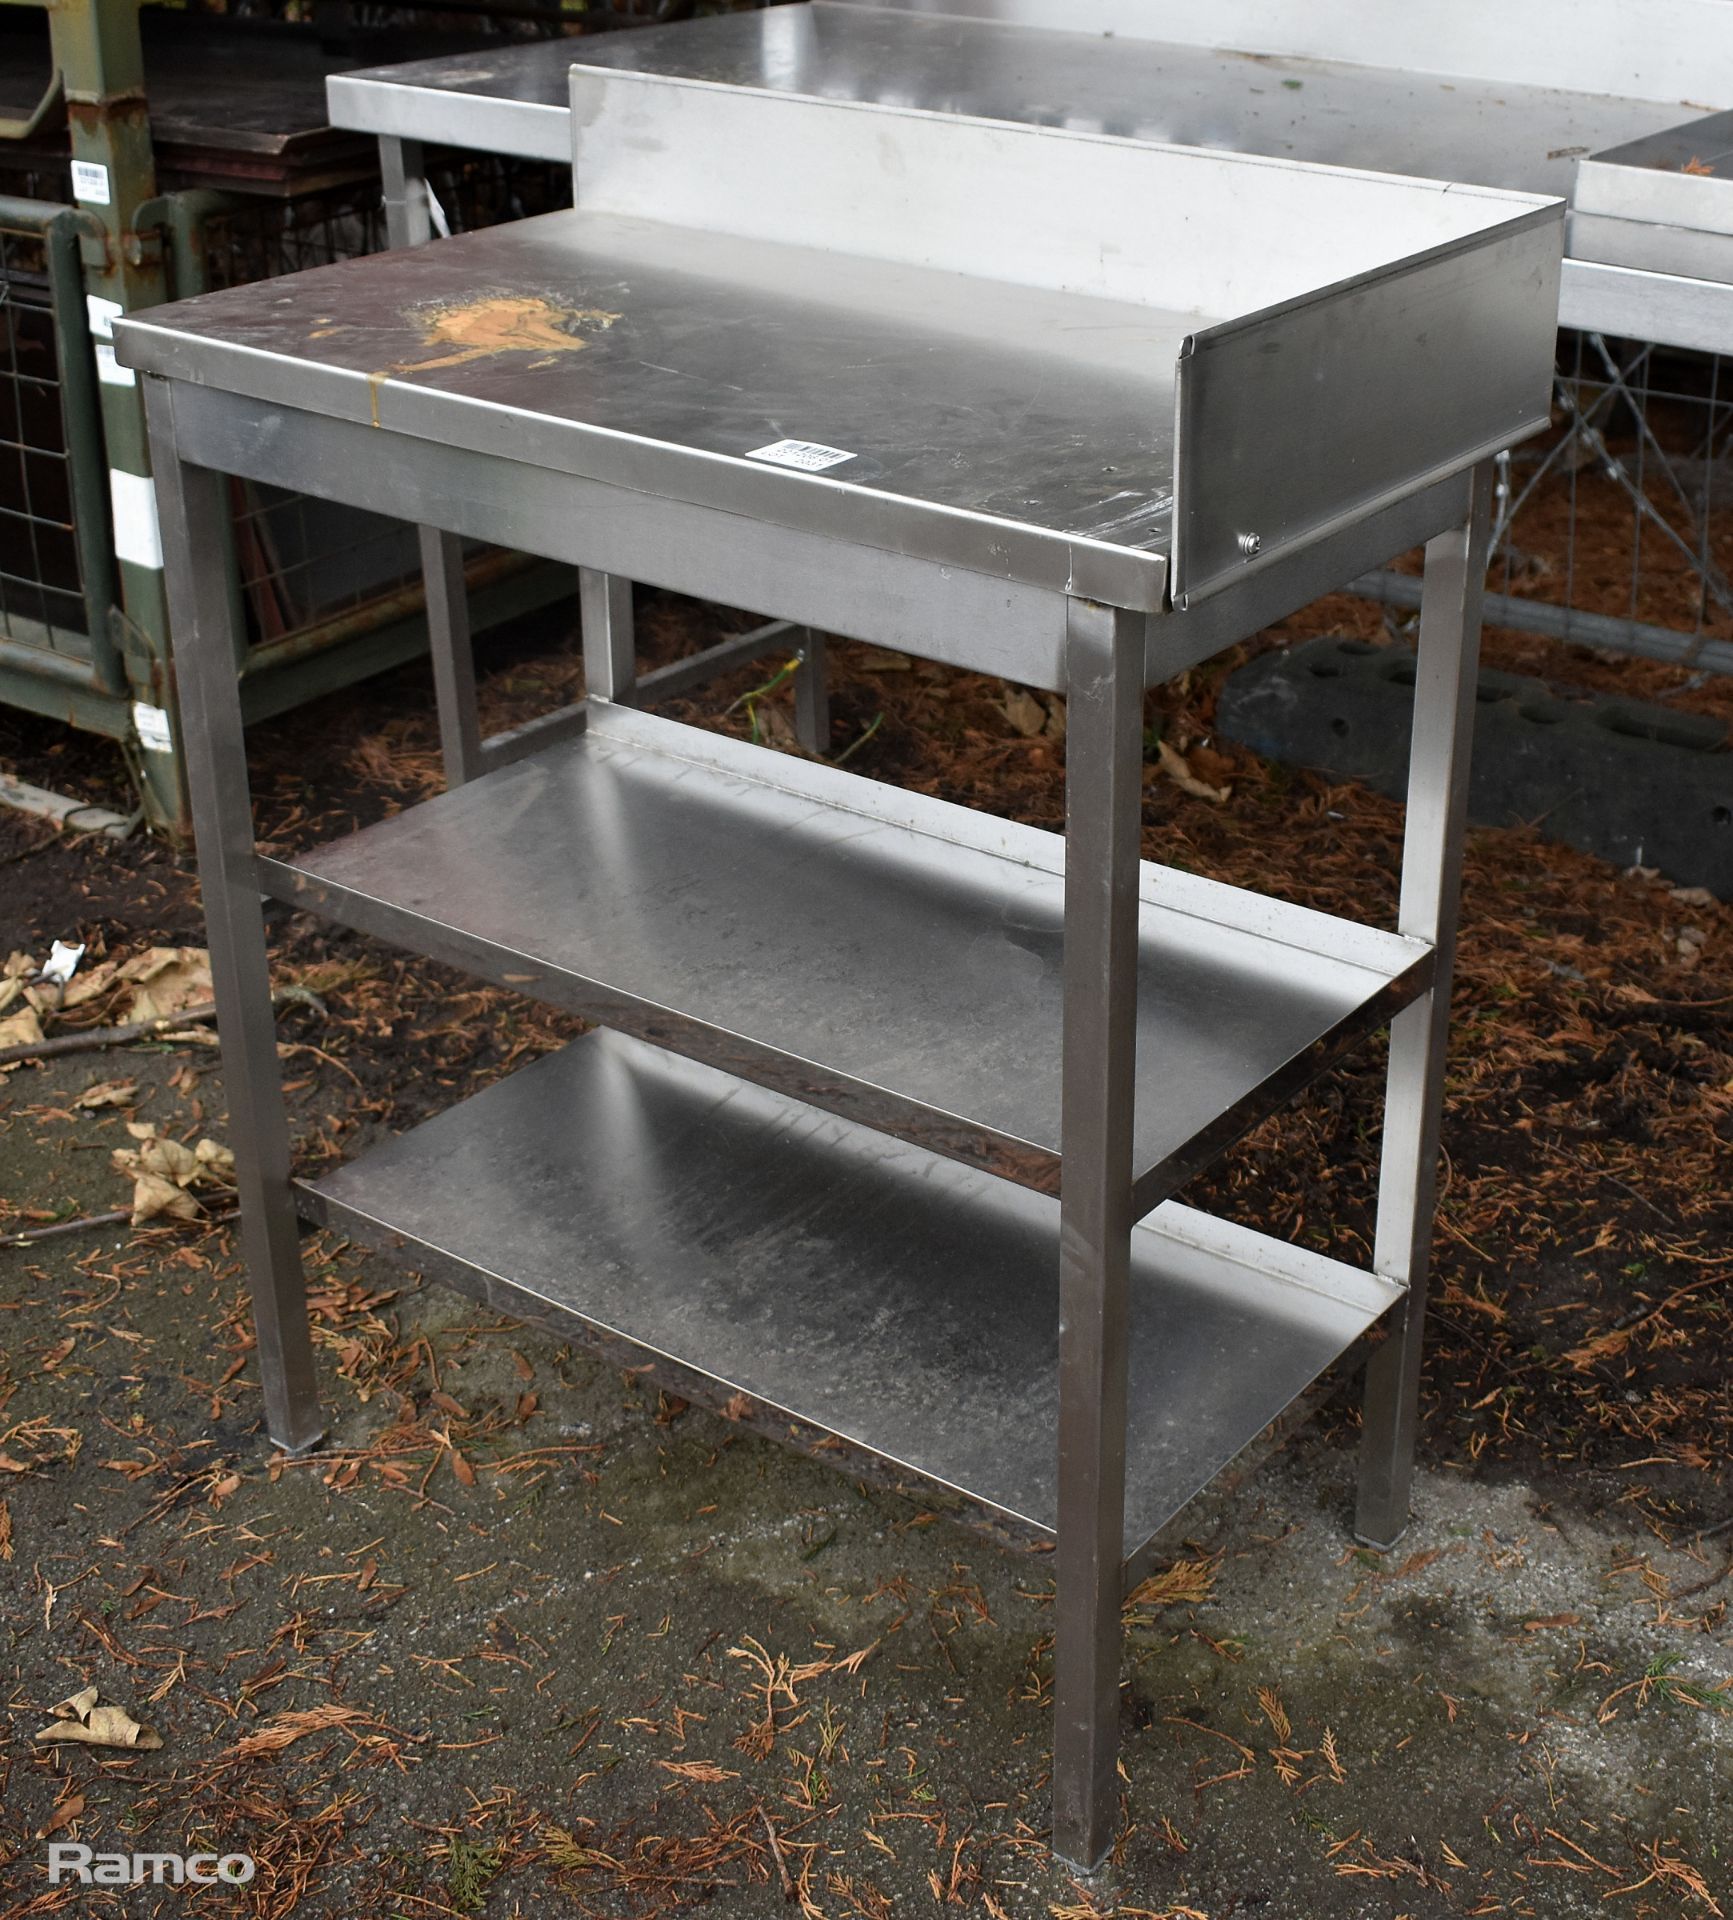 Stainless Steel left-hand 3-tier table L 44 x W 83 x H 90cm - Image 3 of 4